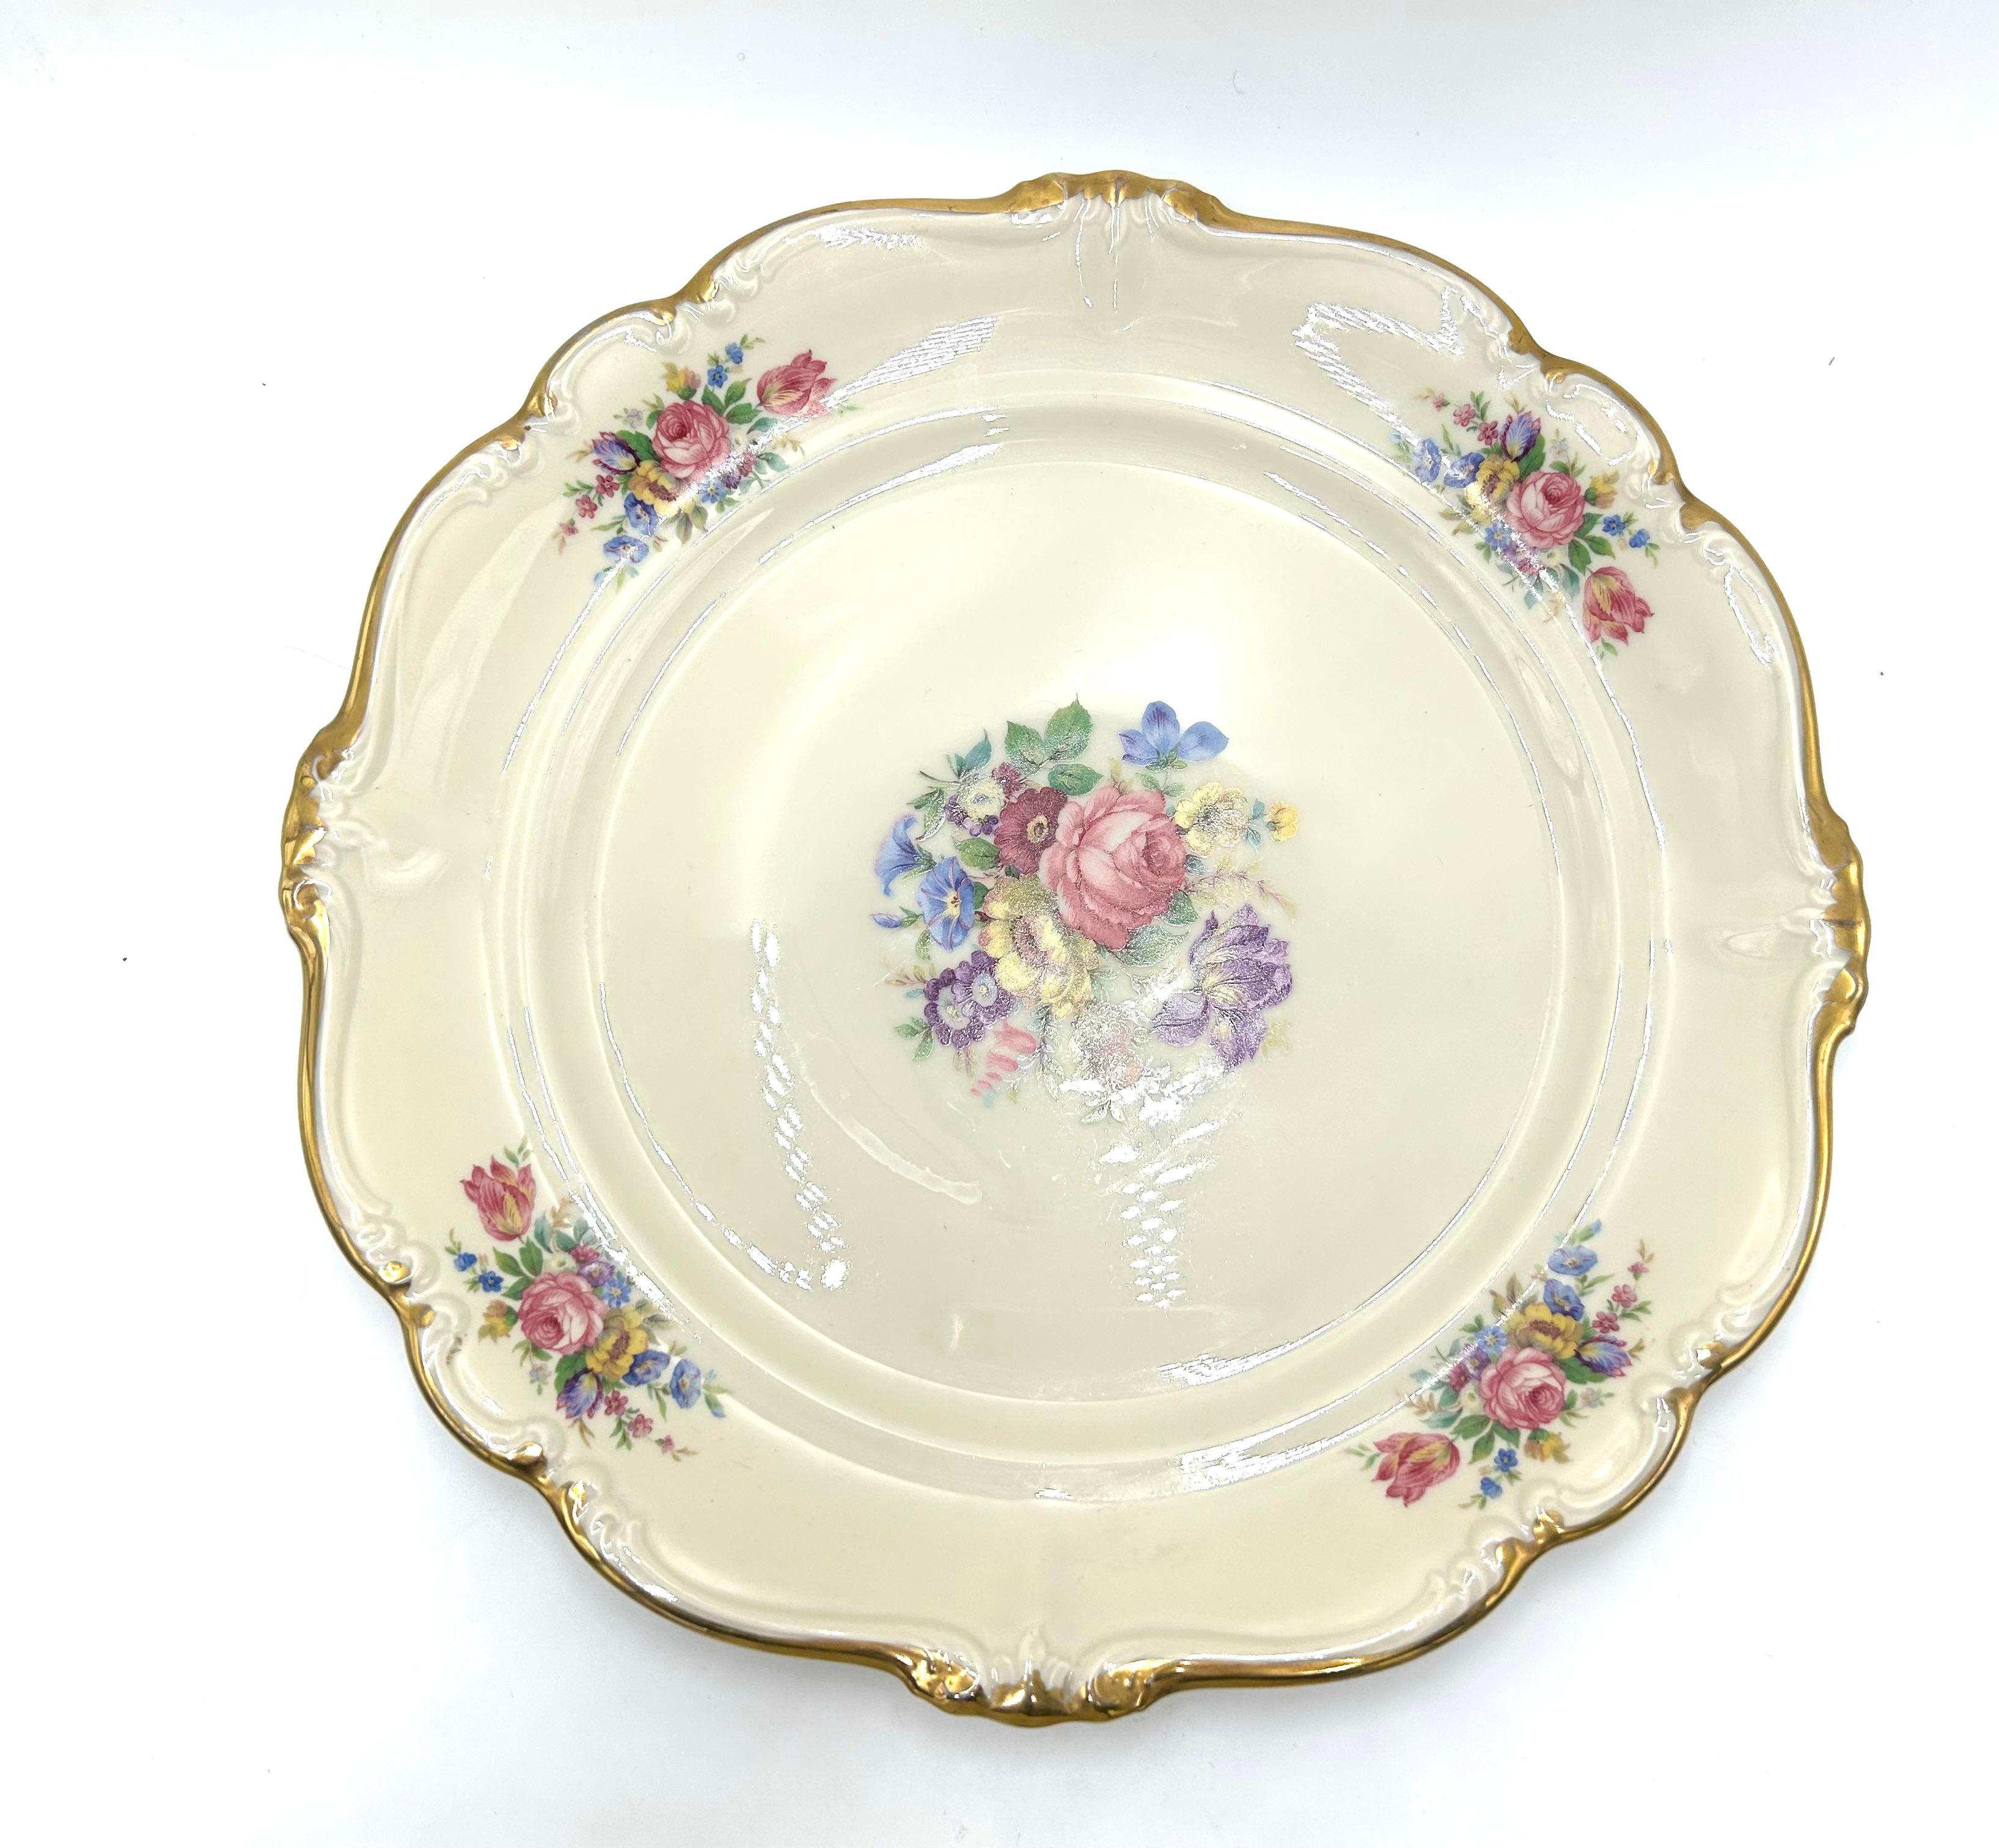 Porcelain plate, a product of the Pompadour series of the valued German manufacturer Rosenthal.
Porcelain in ecru color, decorated with gilding and a motif of floral bouquets
Signed with the mark of the manufacturer from 1944. Very good condition,